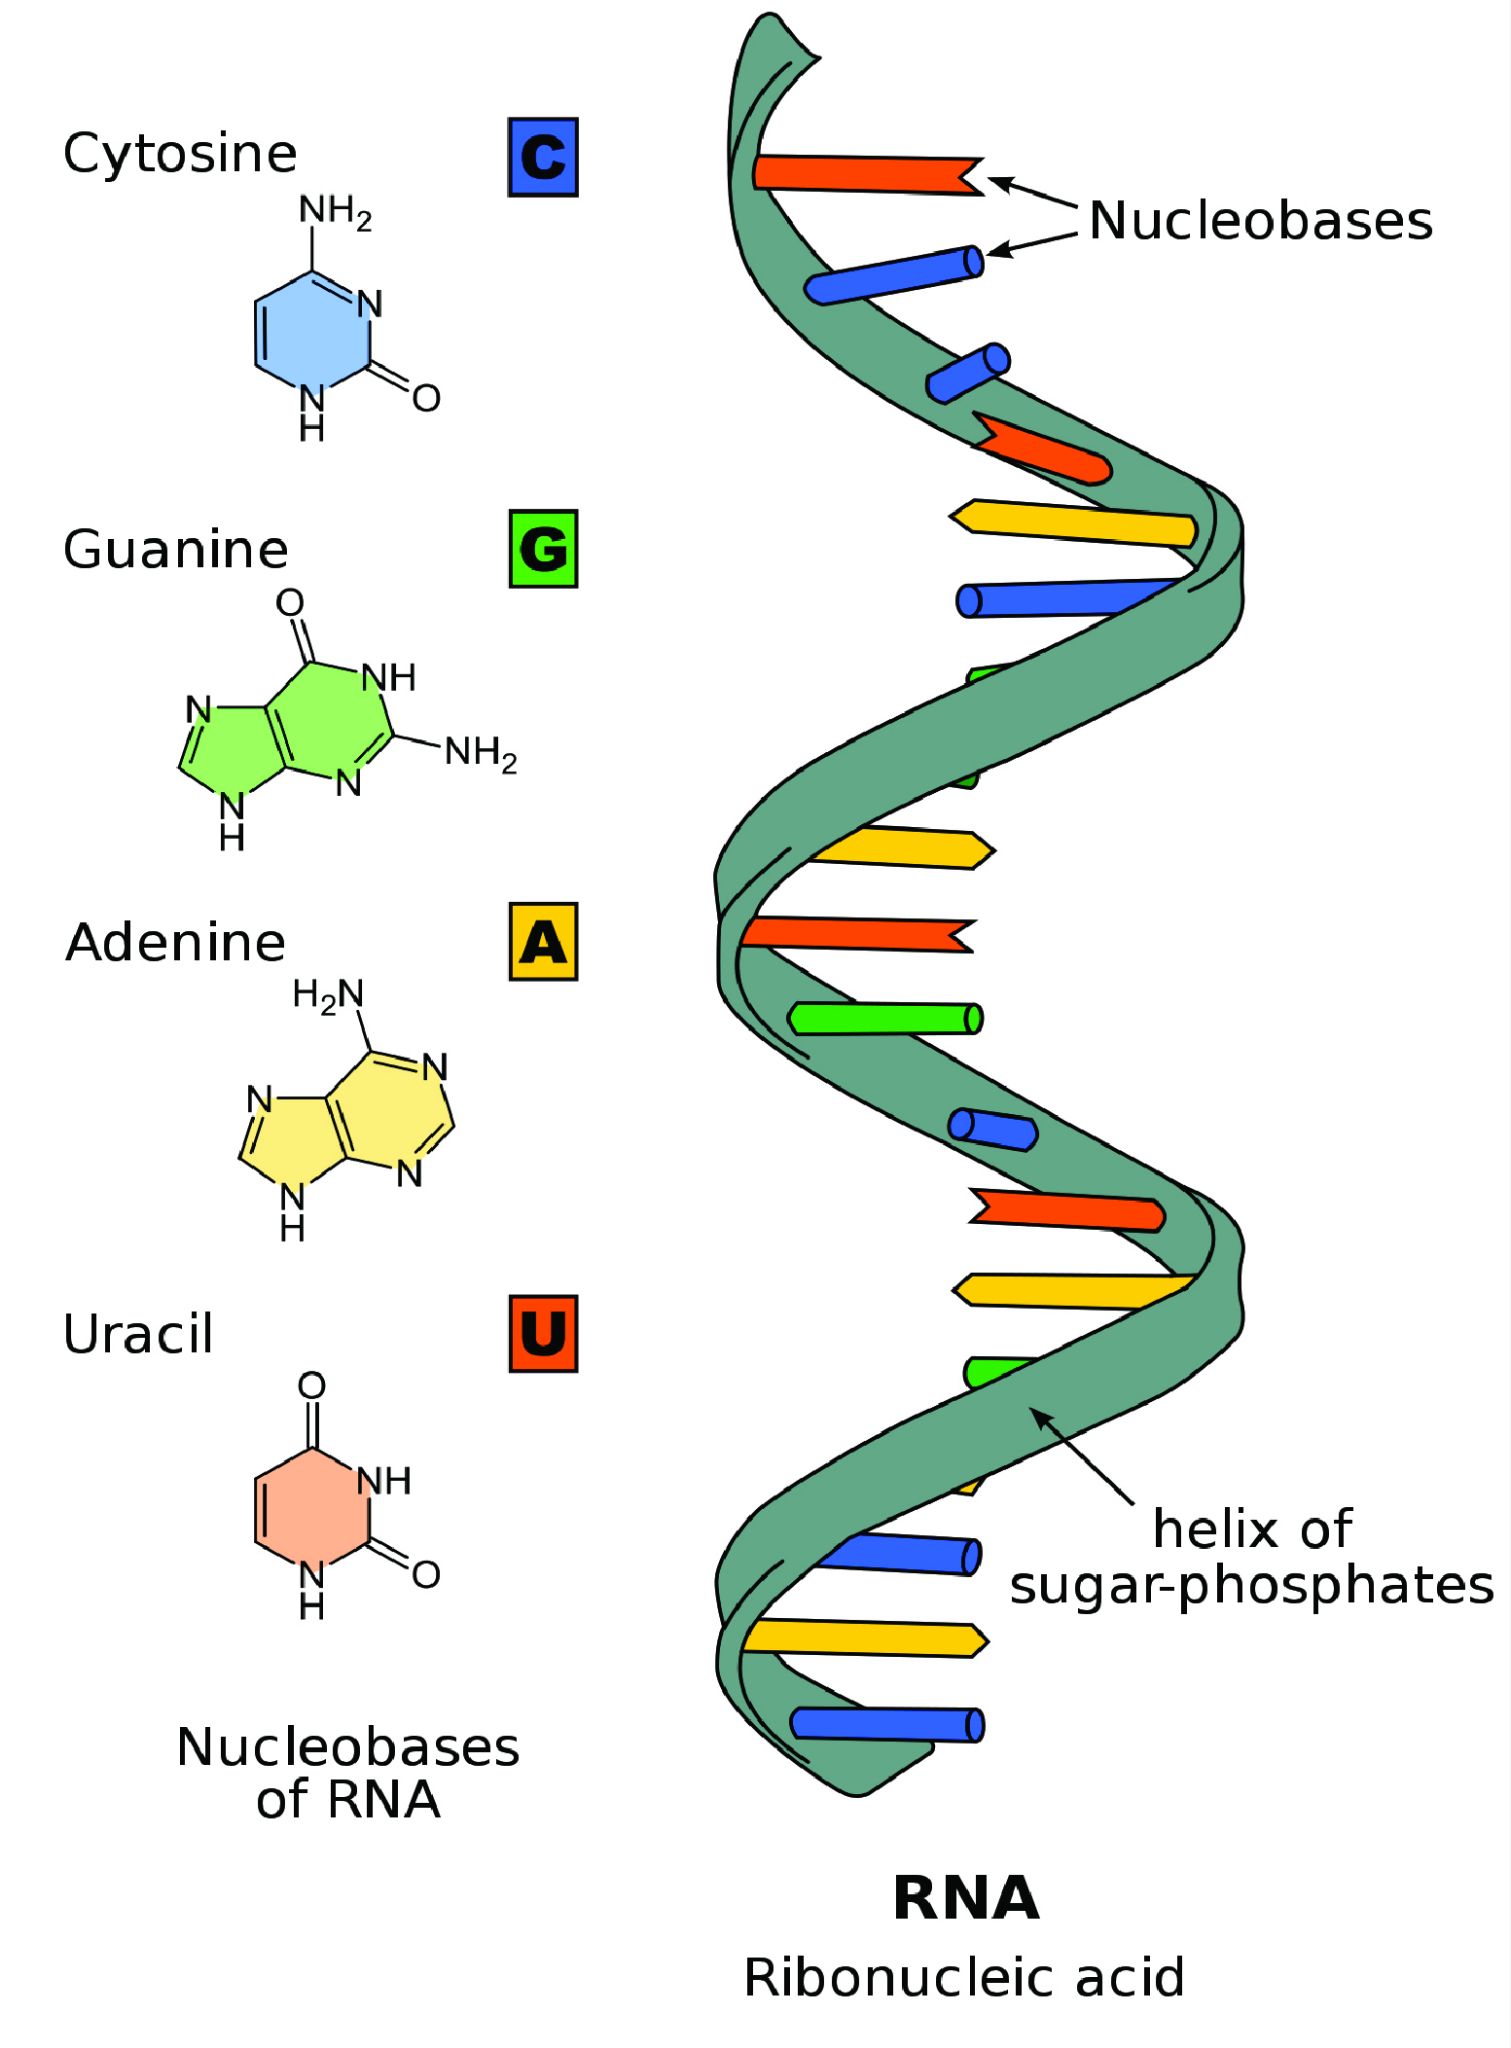 Single stranded RNA is composed of 4 types of nucleobases: cytosine, guanine, adenine, and uracil.